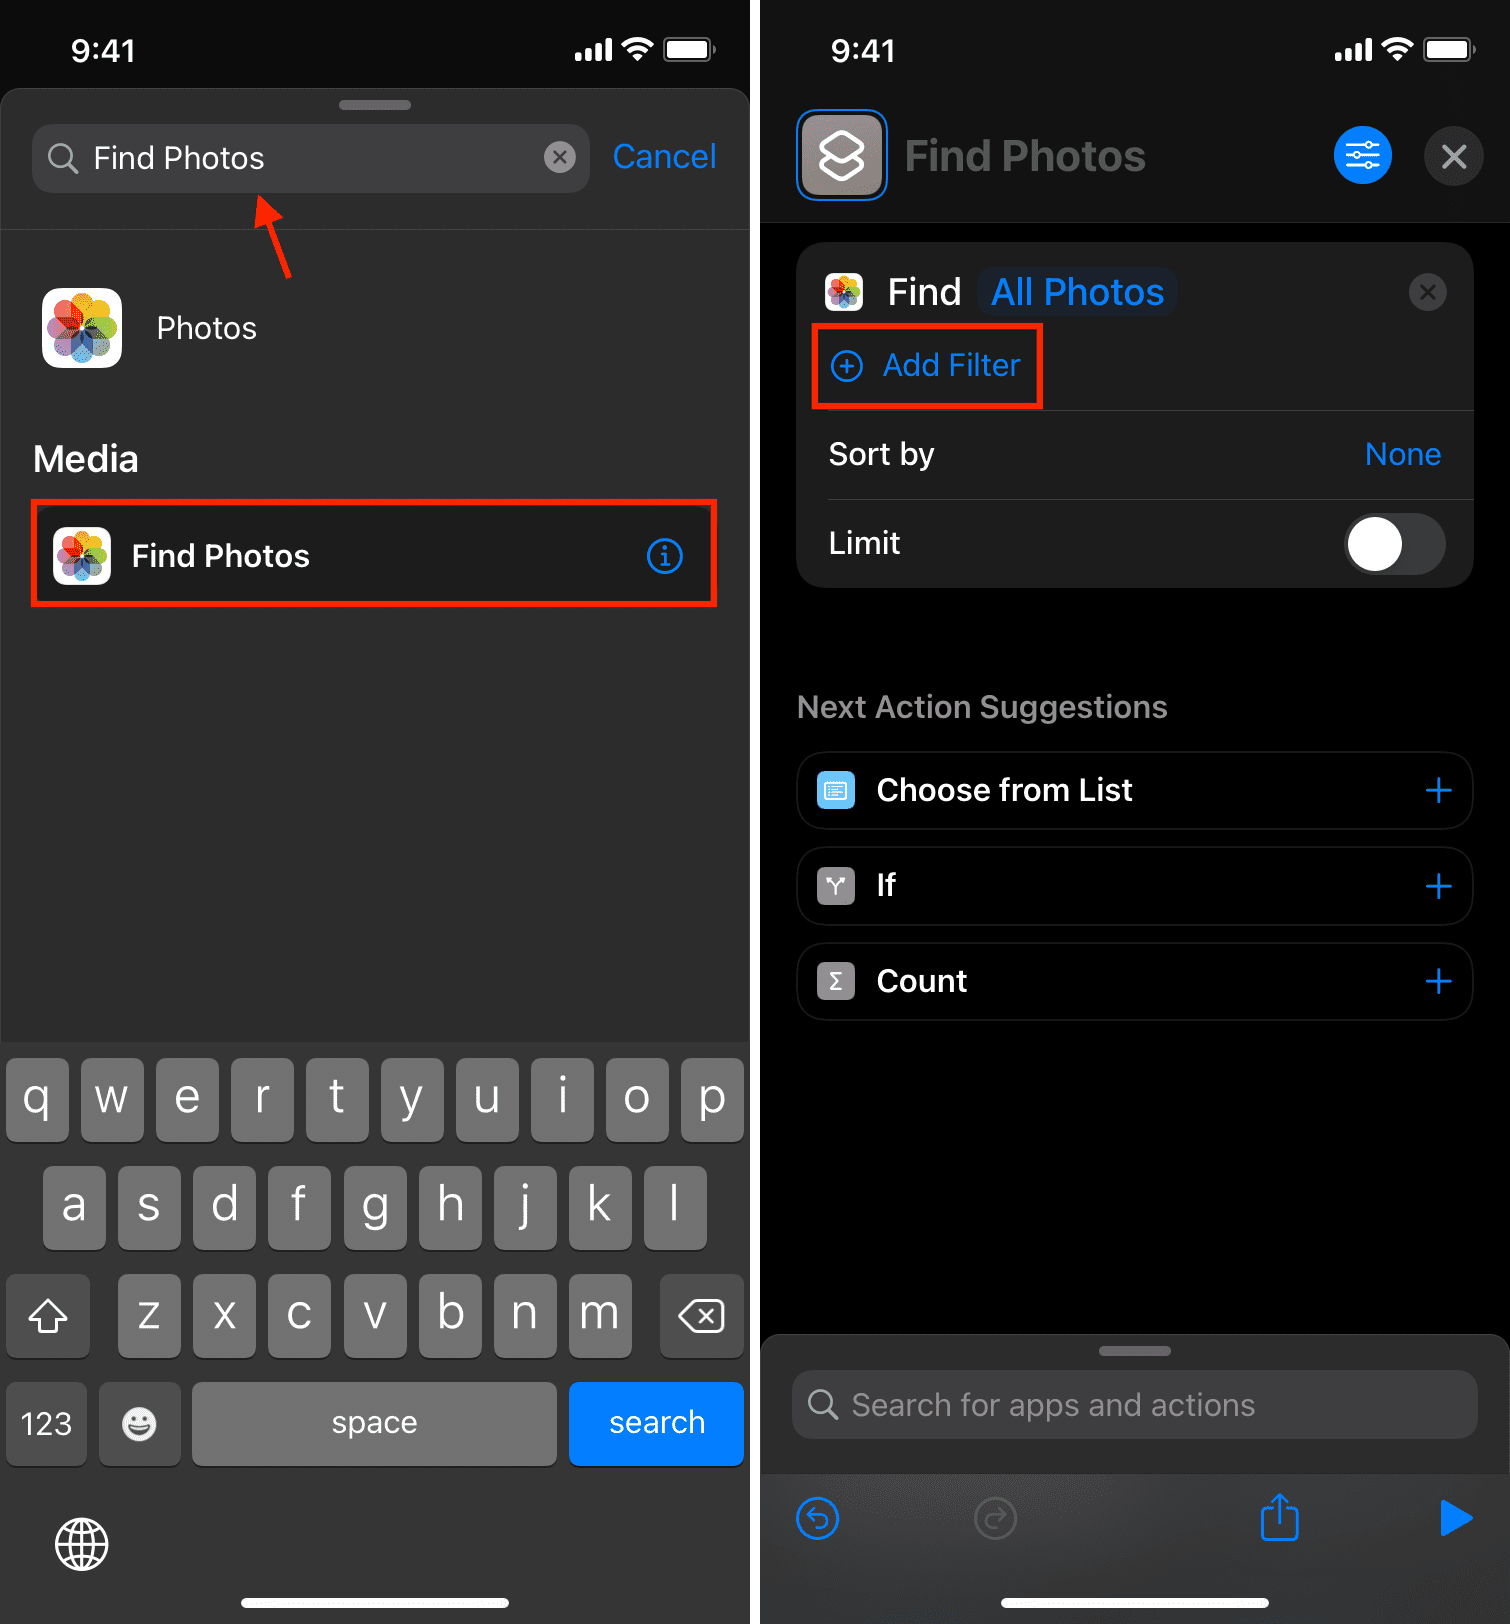 Find Photos action added to your shortcut